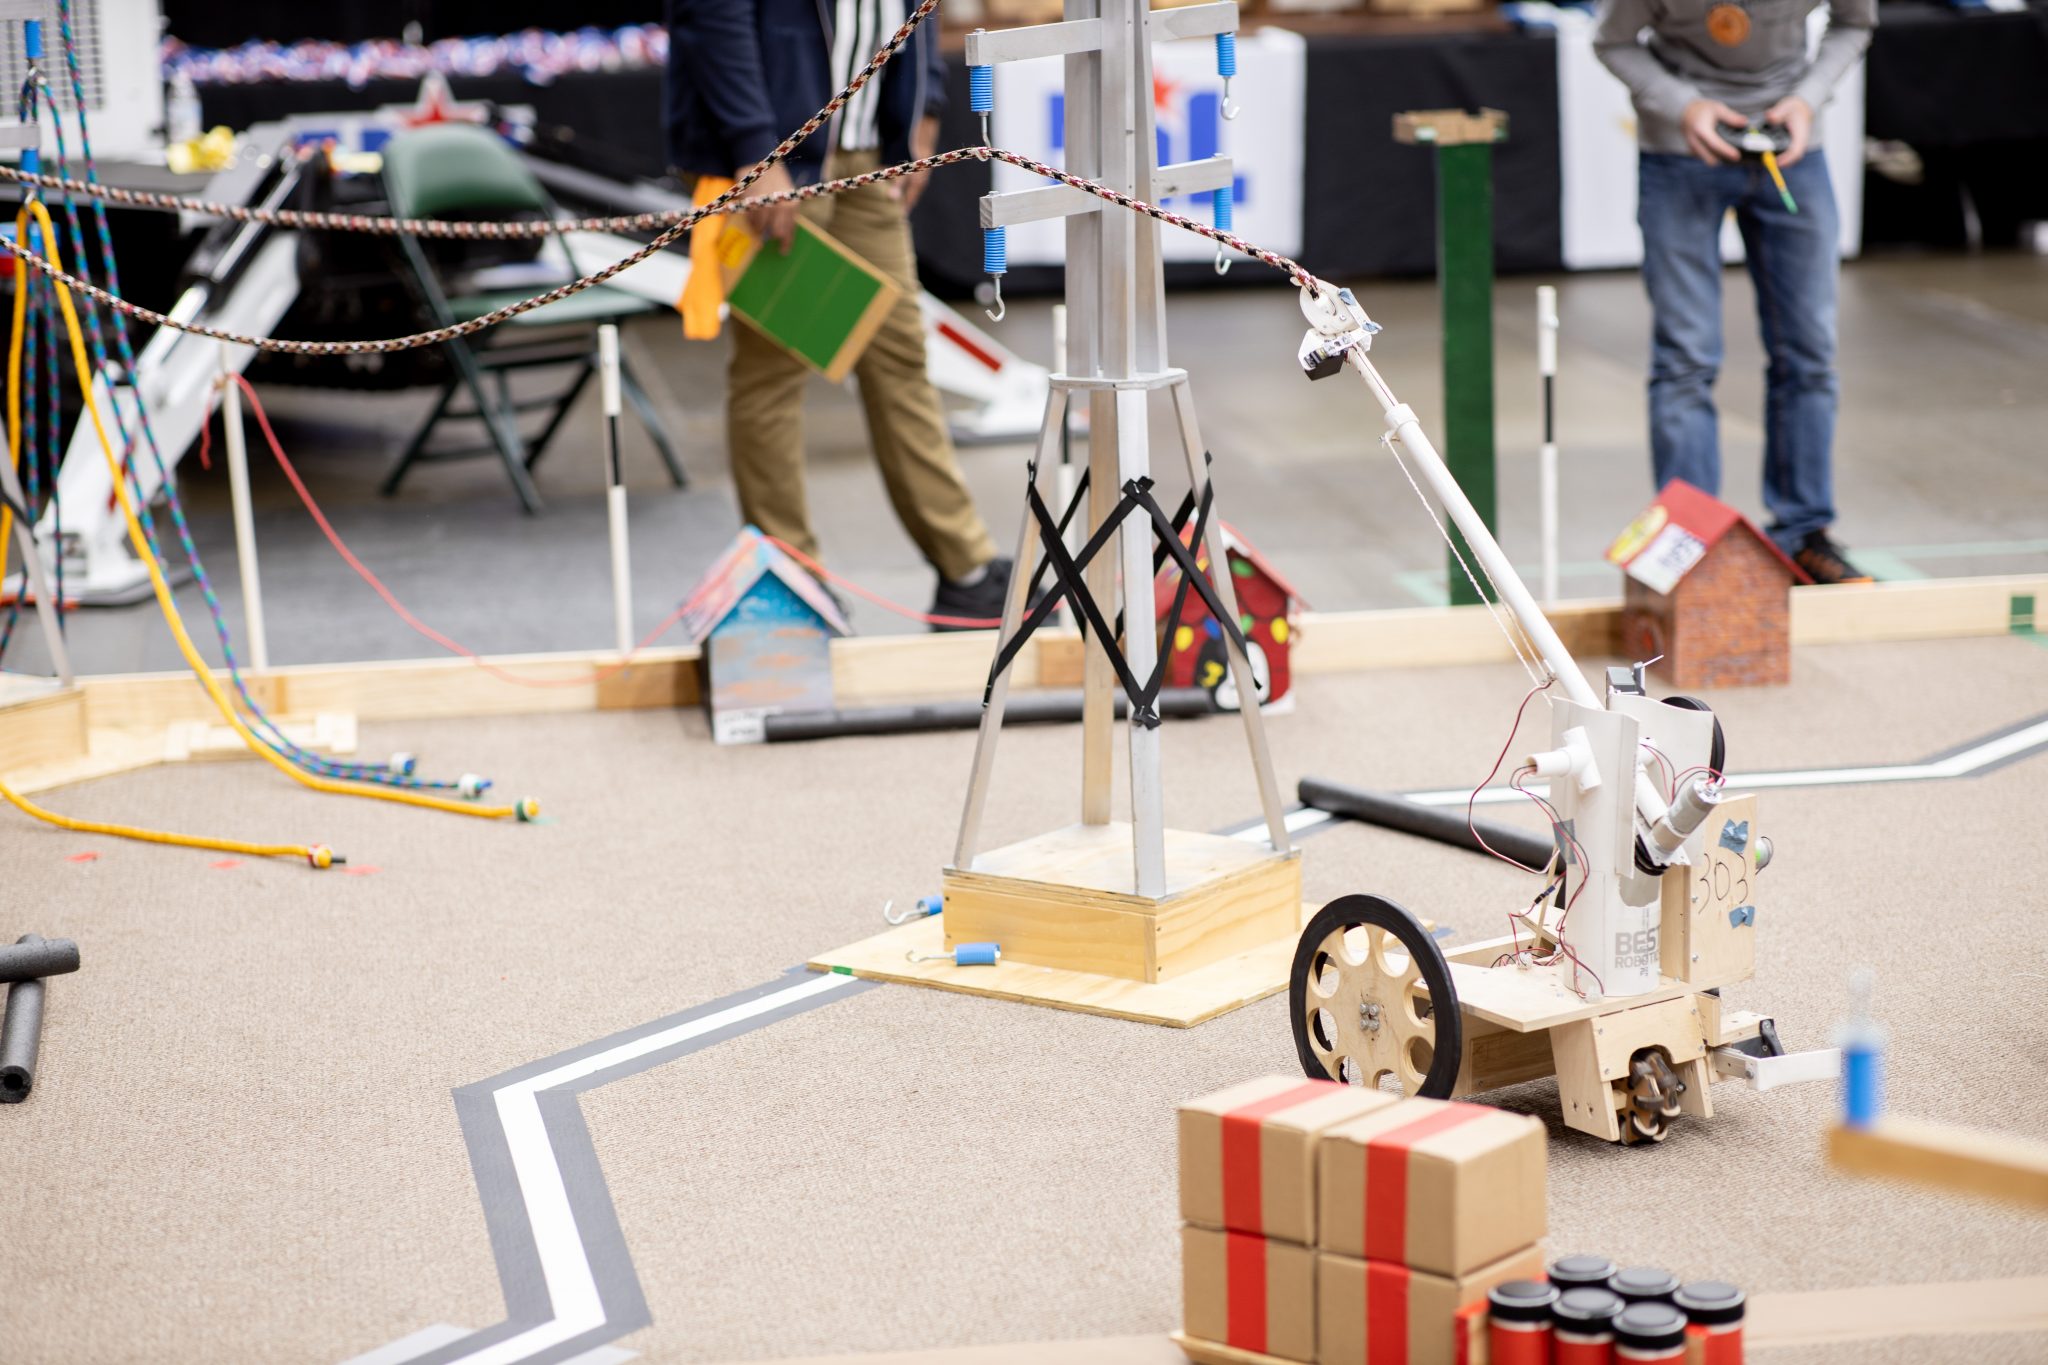 2019 BEST Robotics Competition Office of Research and Innovation